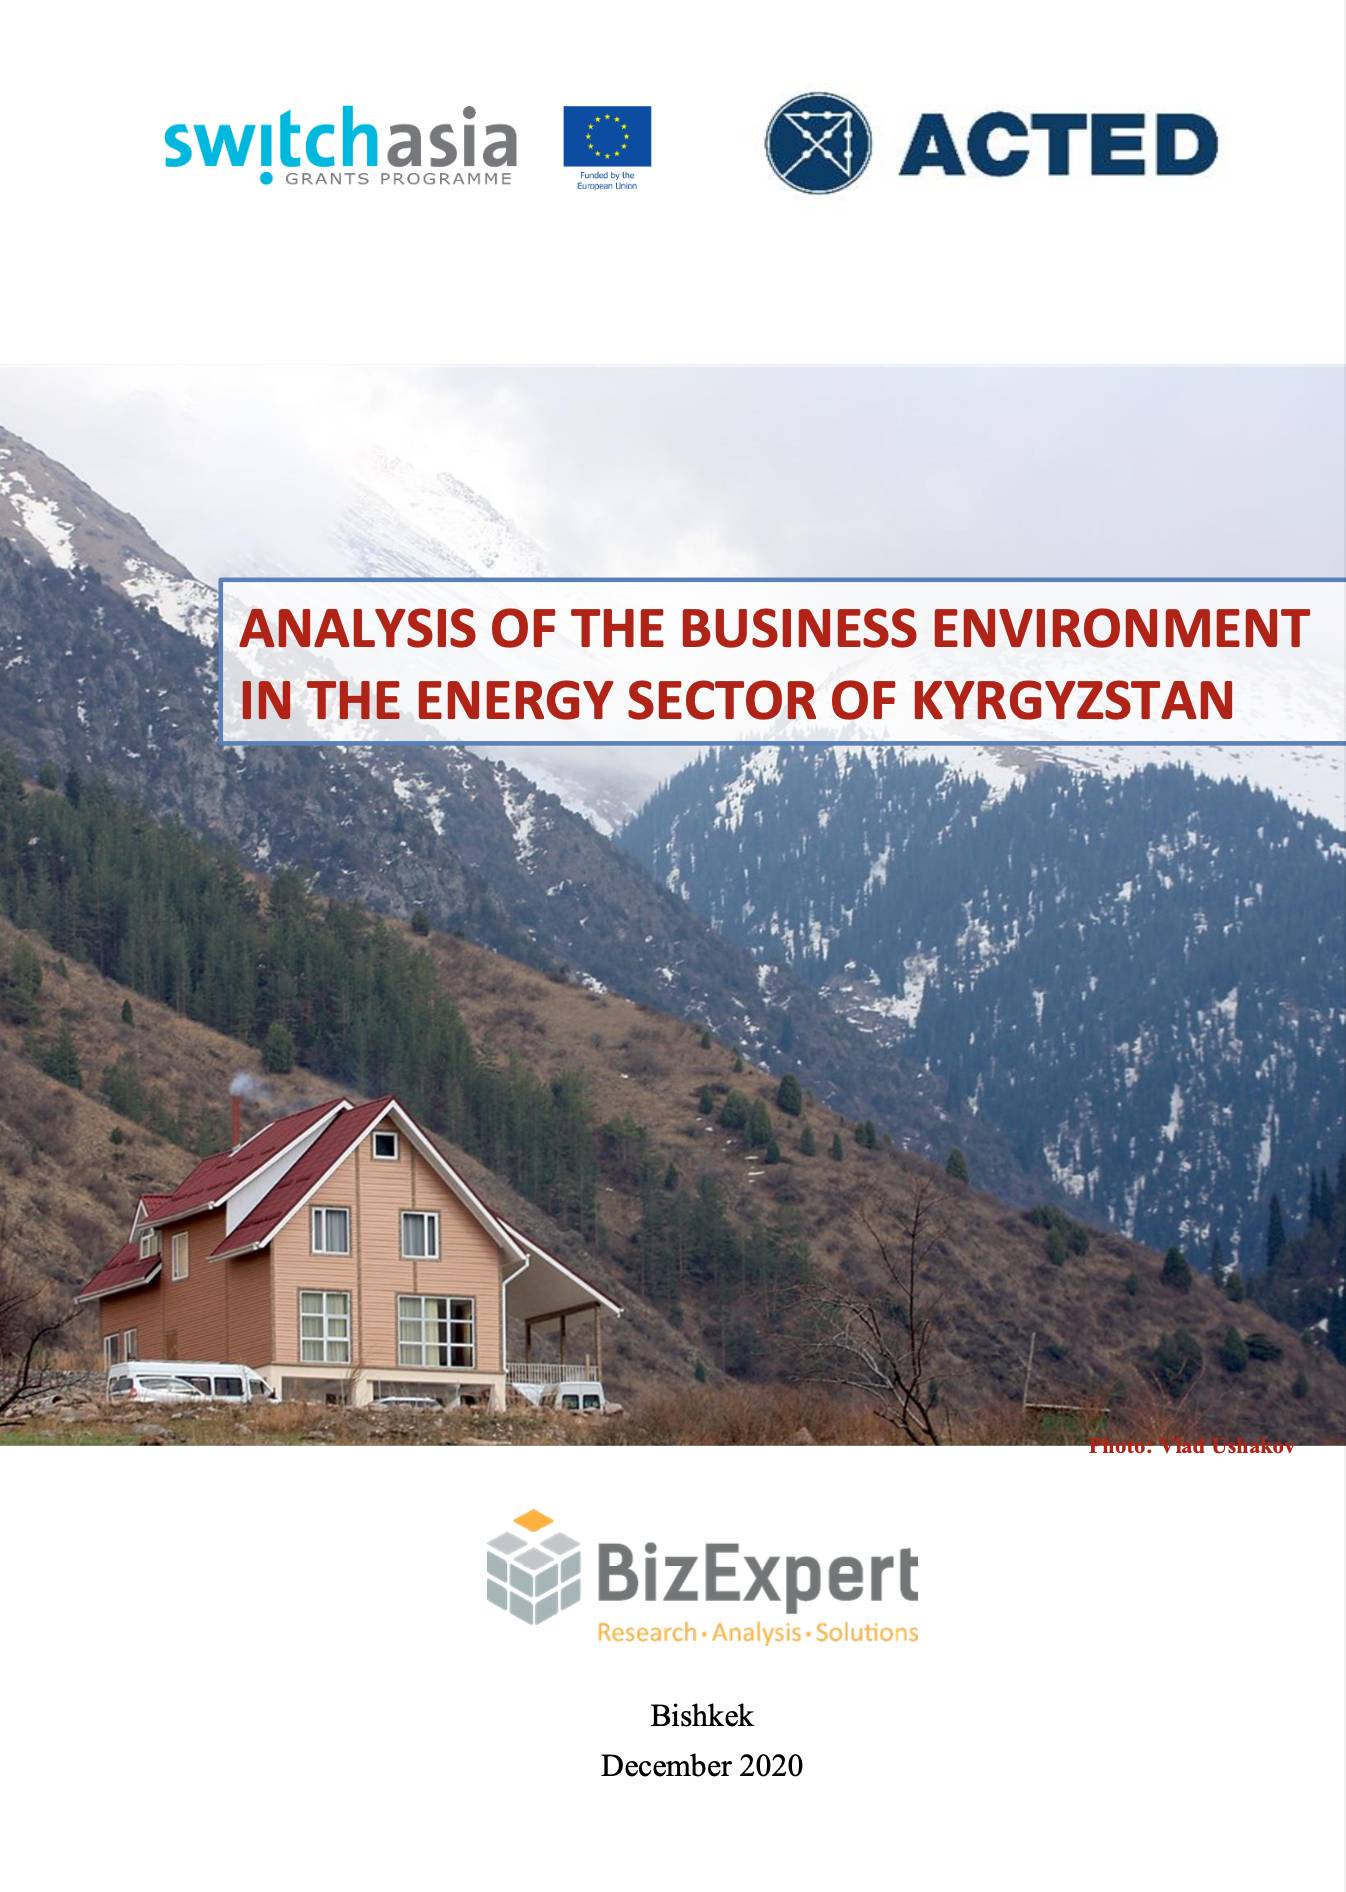 Analysis of the business environment in the energy sector in Kyrgyzstan